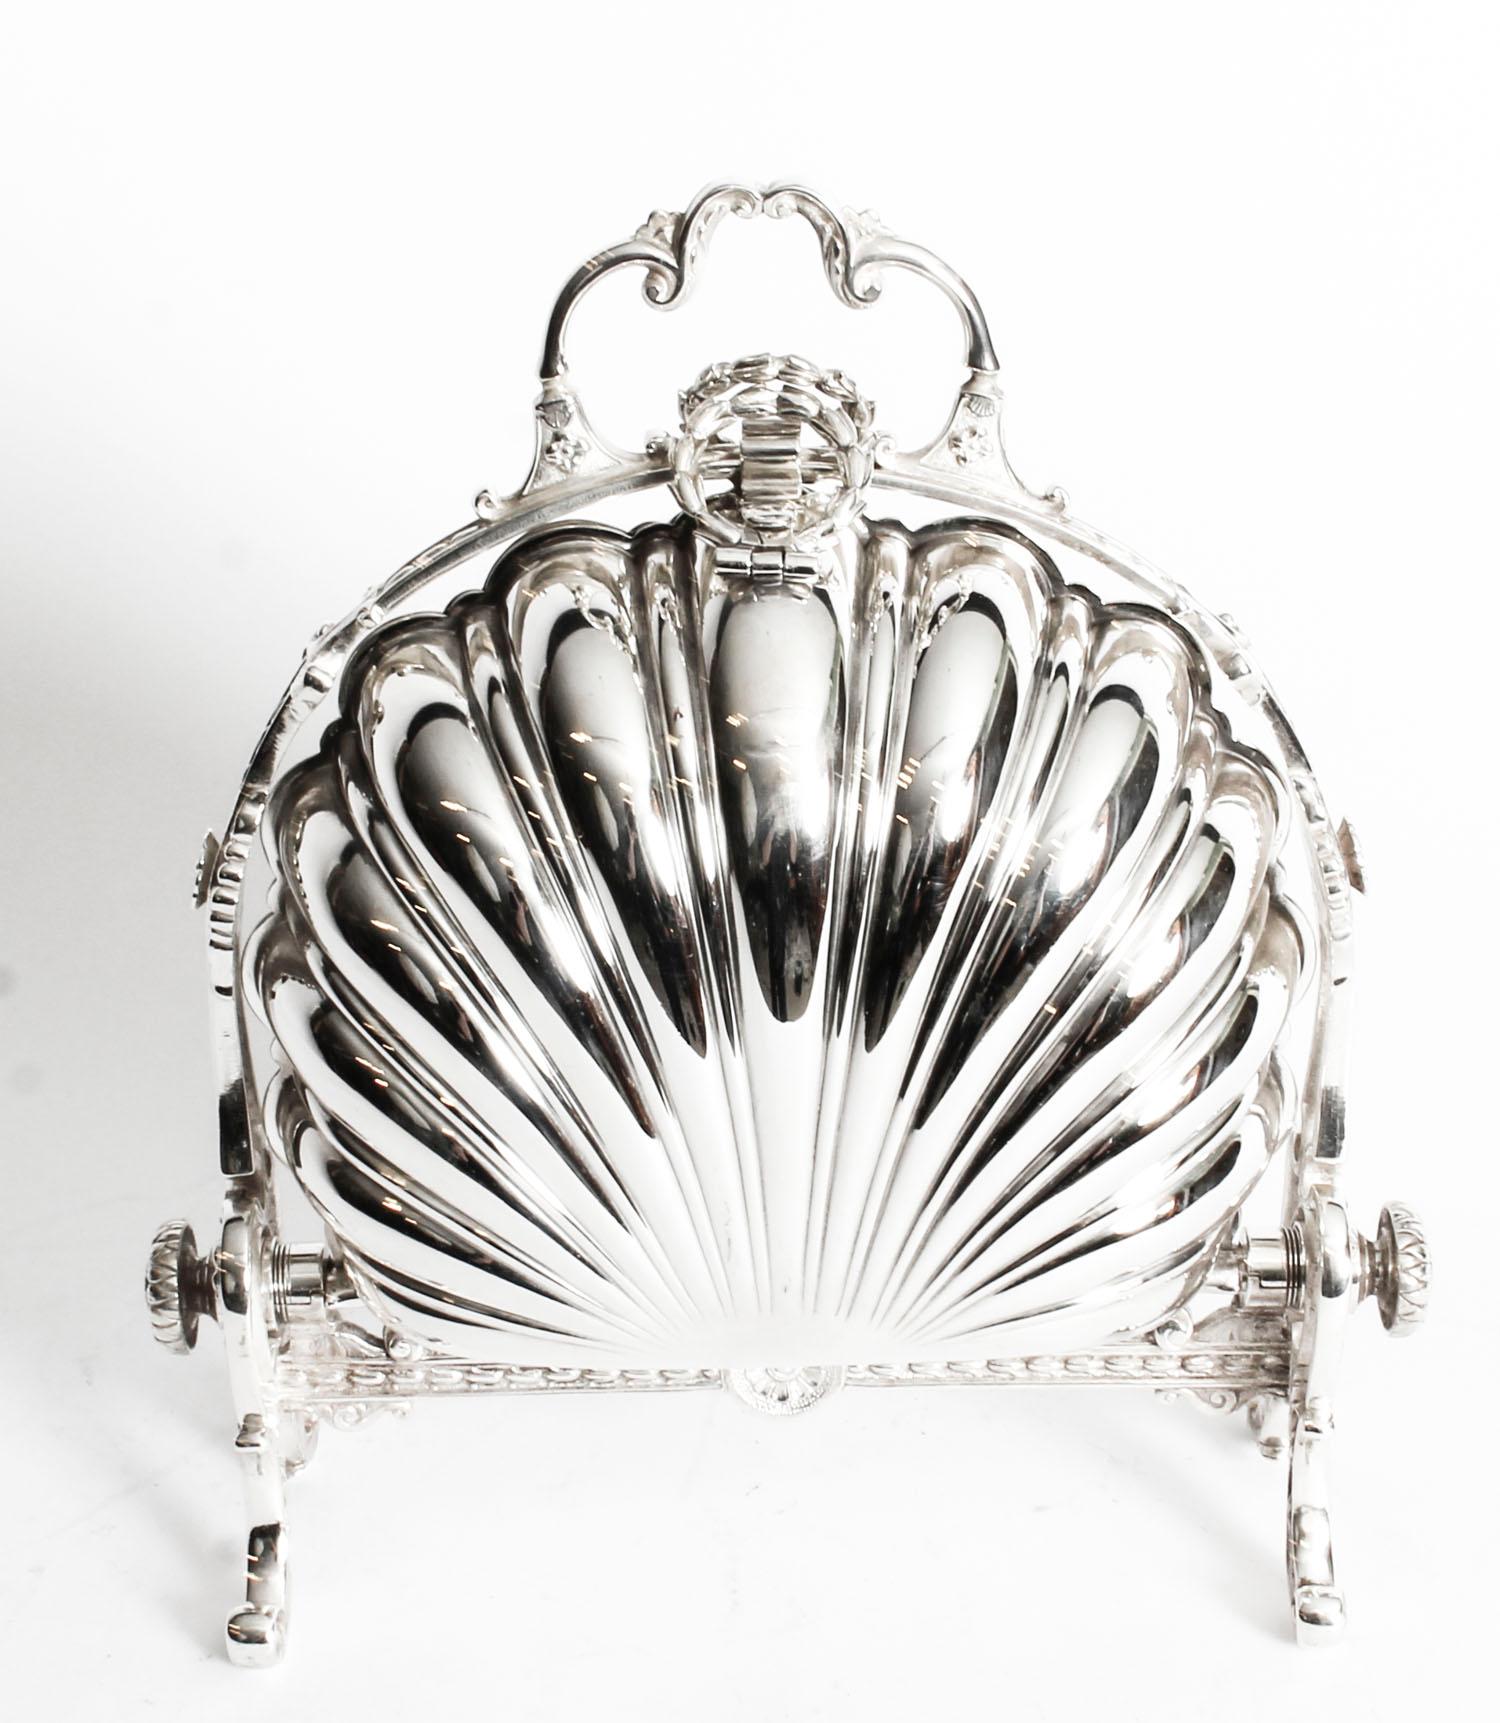 This is a highly decorative antique Victorian silver plated folding biscuit box, the base bearing Patent N&H 350 85, circa 1880 in date.
 
It has a scalloped shell-shaped body sitting in a cast frame with remarkably chased branch supports and the